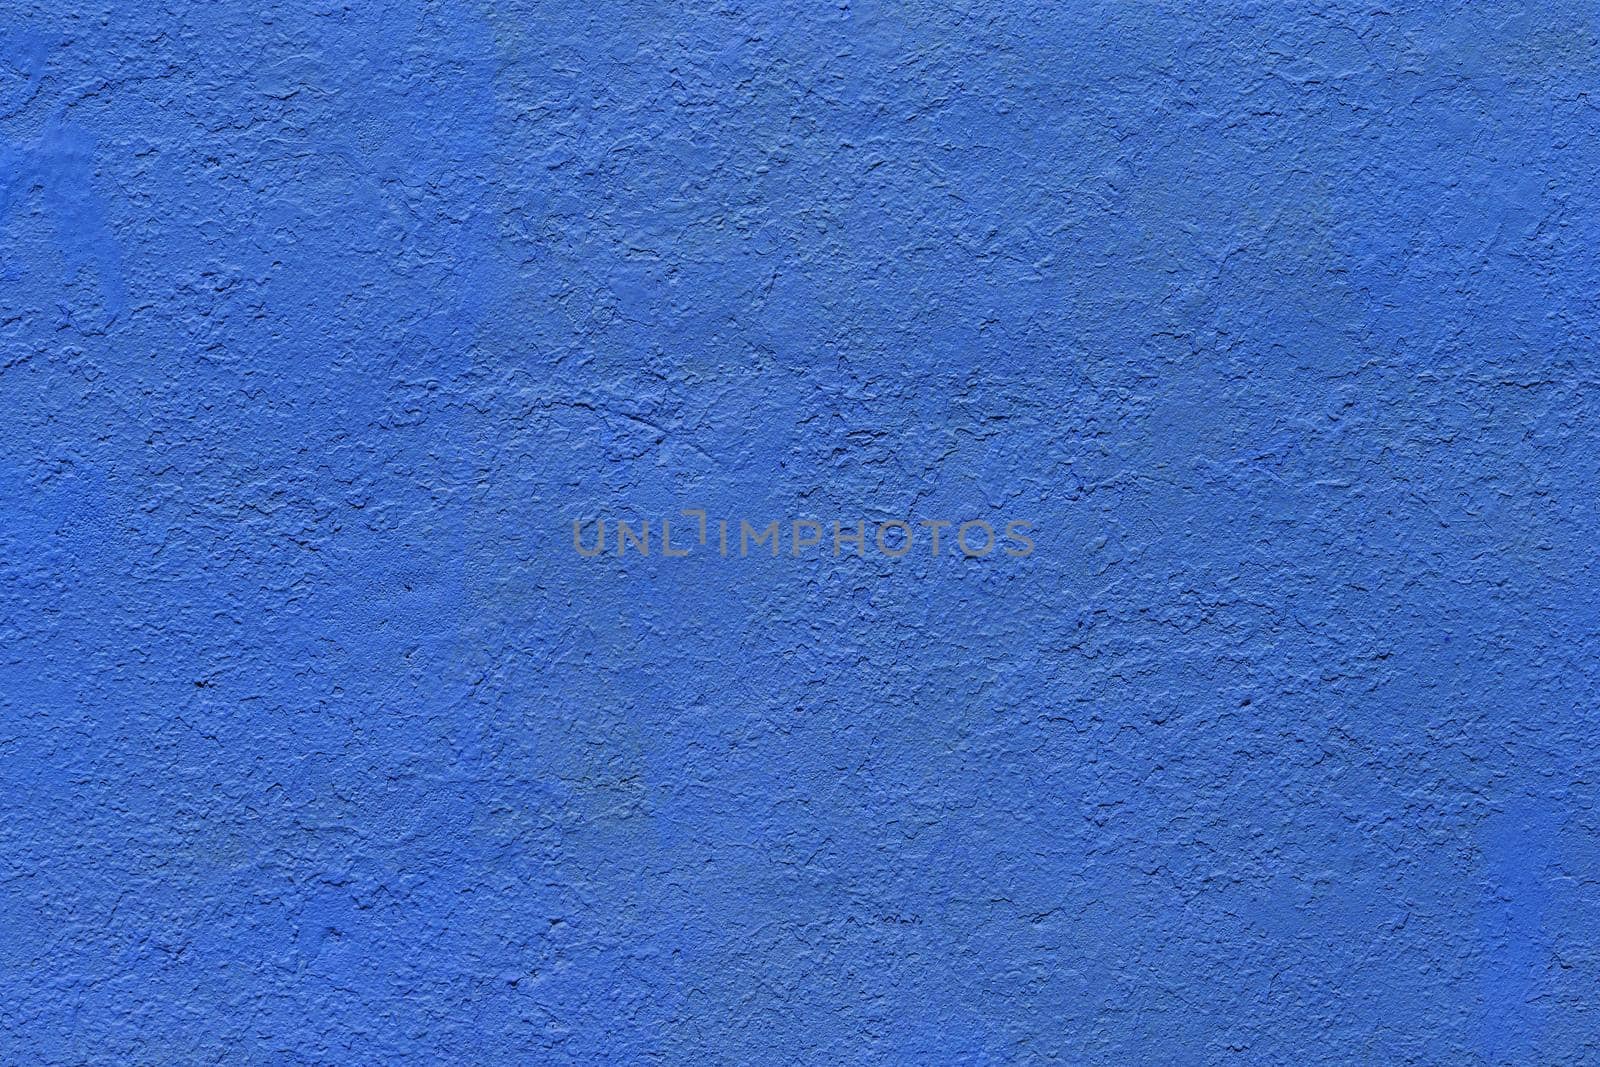 background and texture of flat thick painted matte blue surface under direct sunlight - new paint over fragments of old peeled one